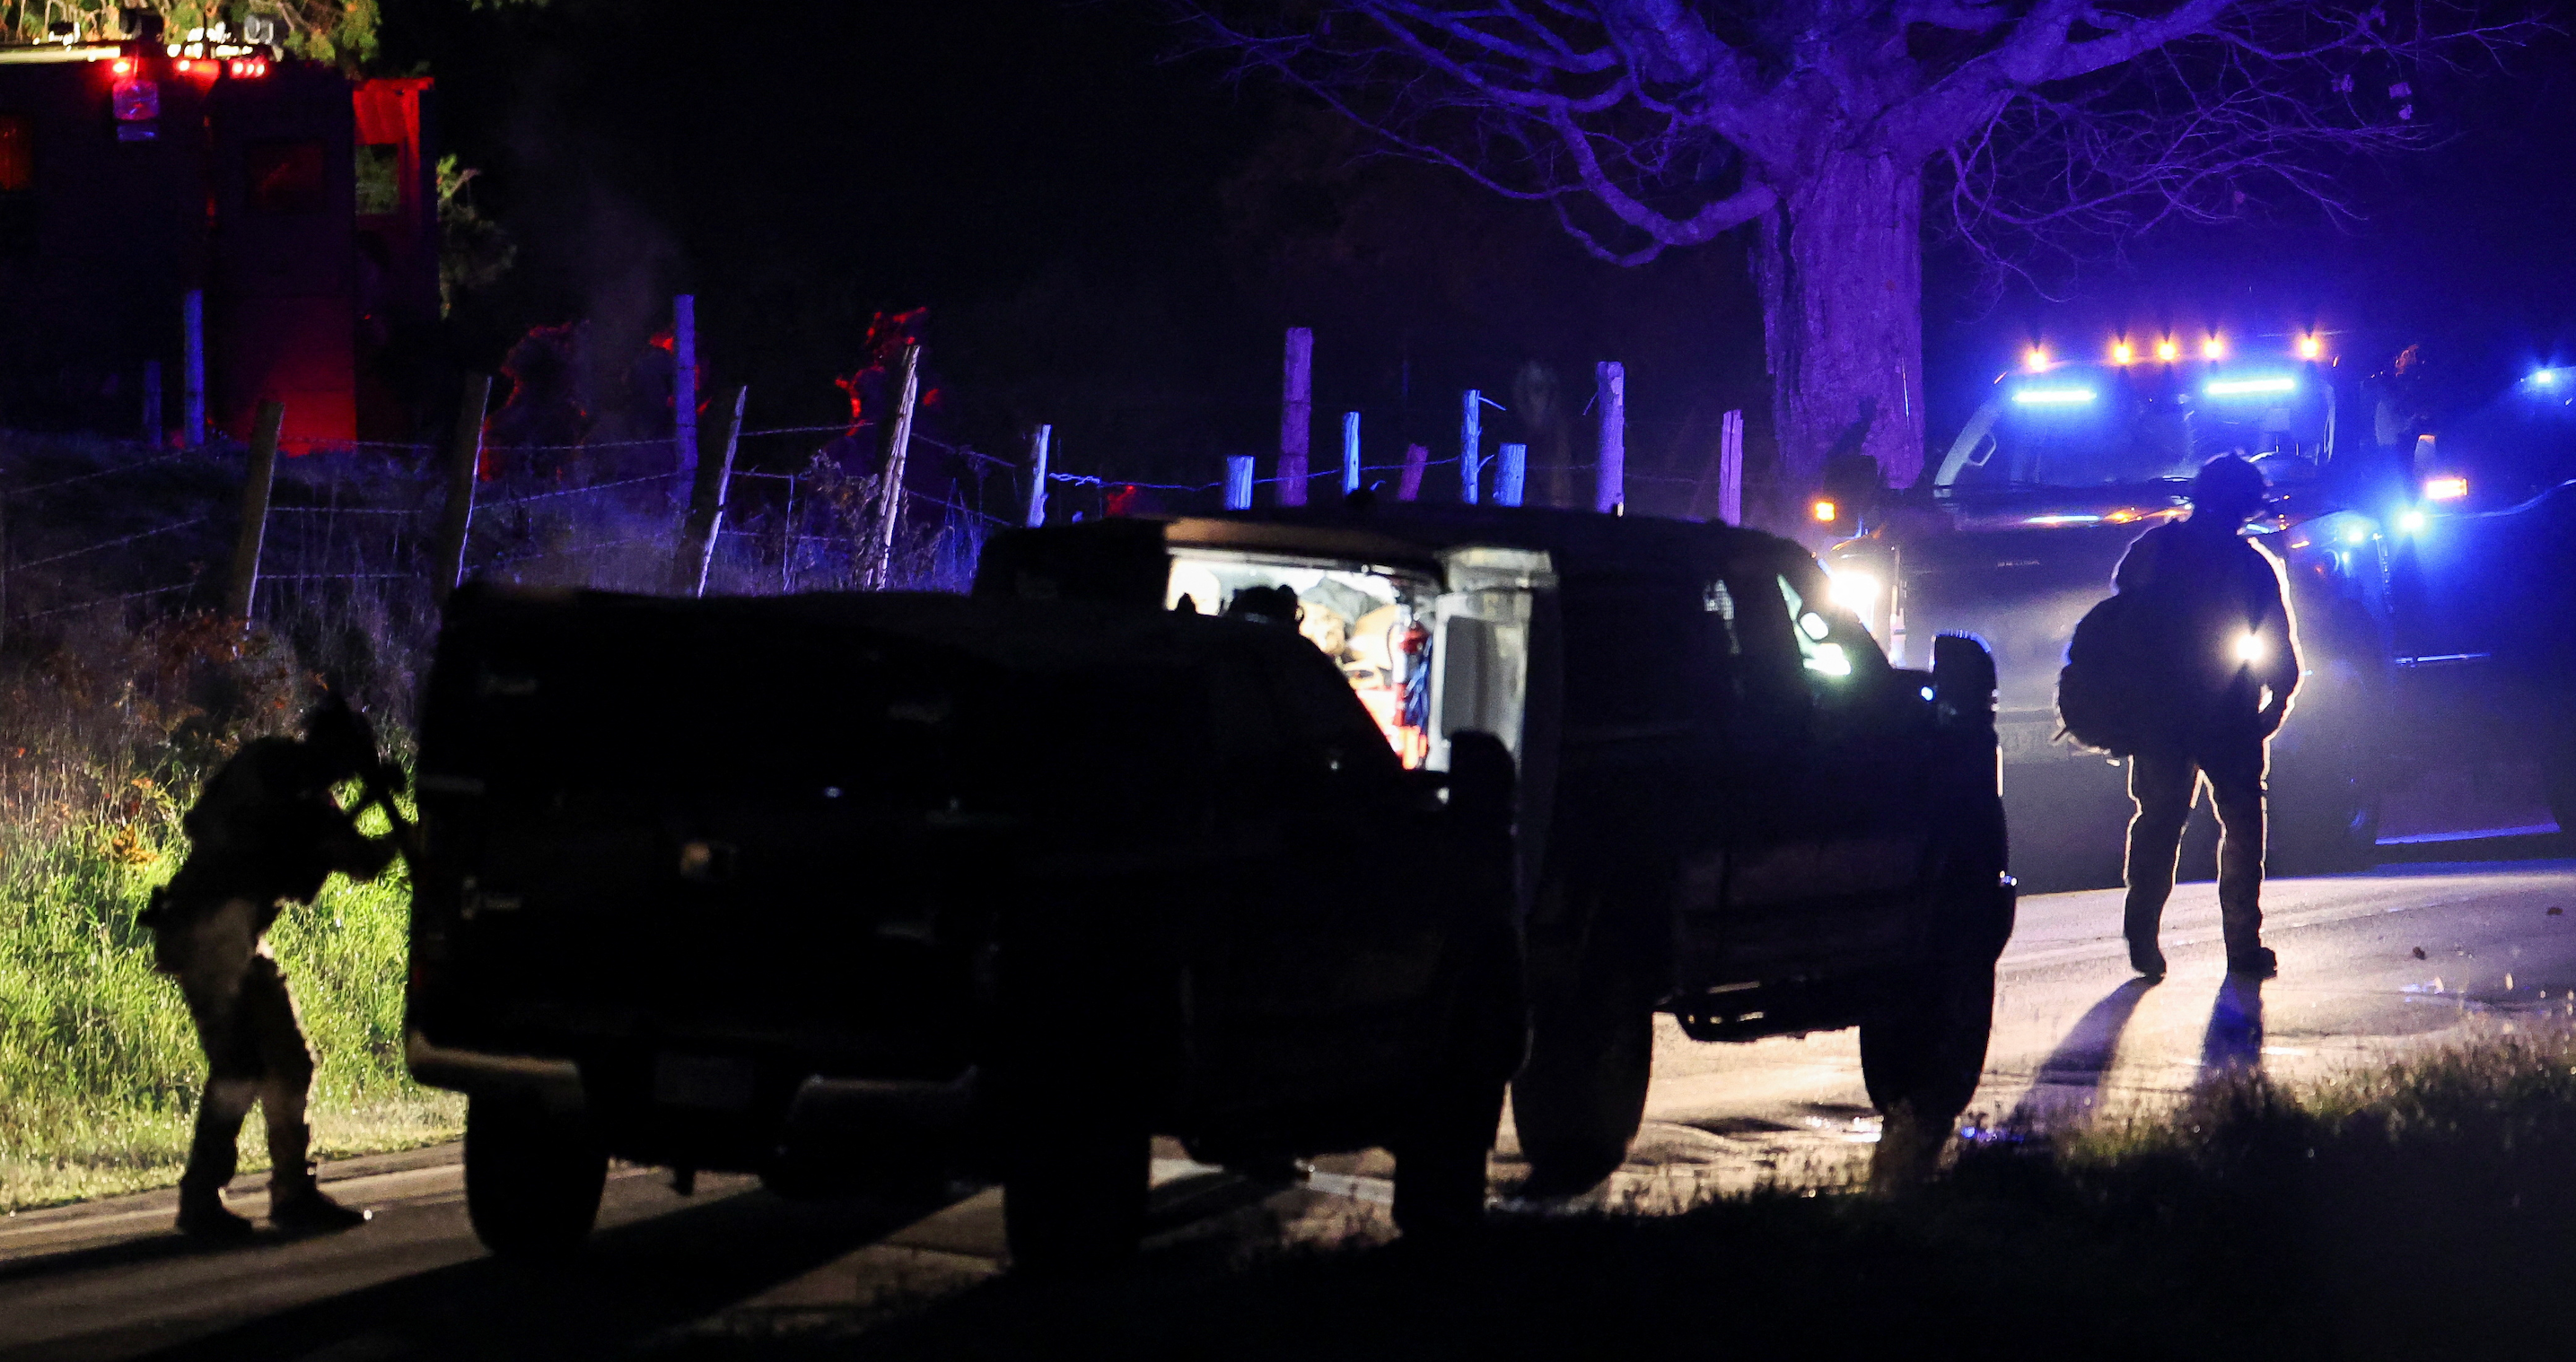 Manhunt for Maine shooter suspect continues, lockdown still in place